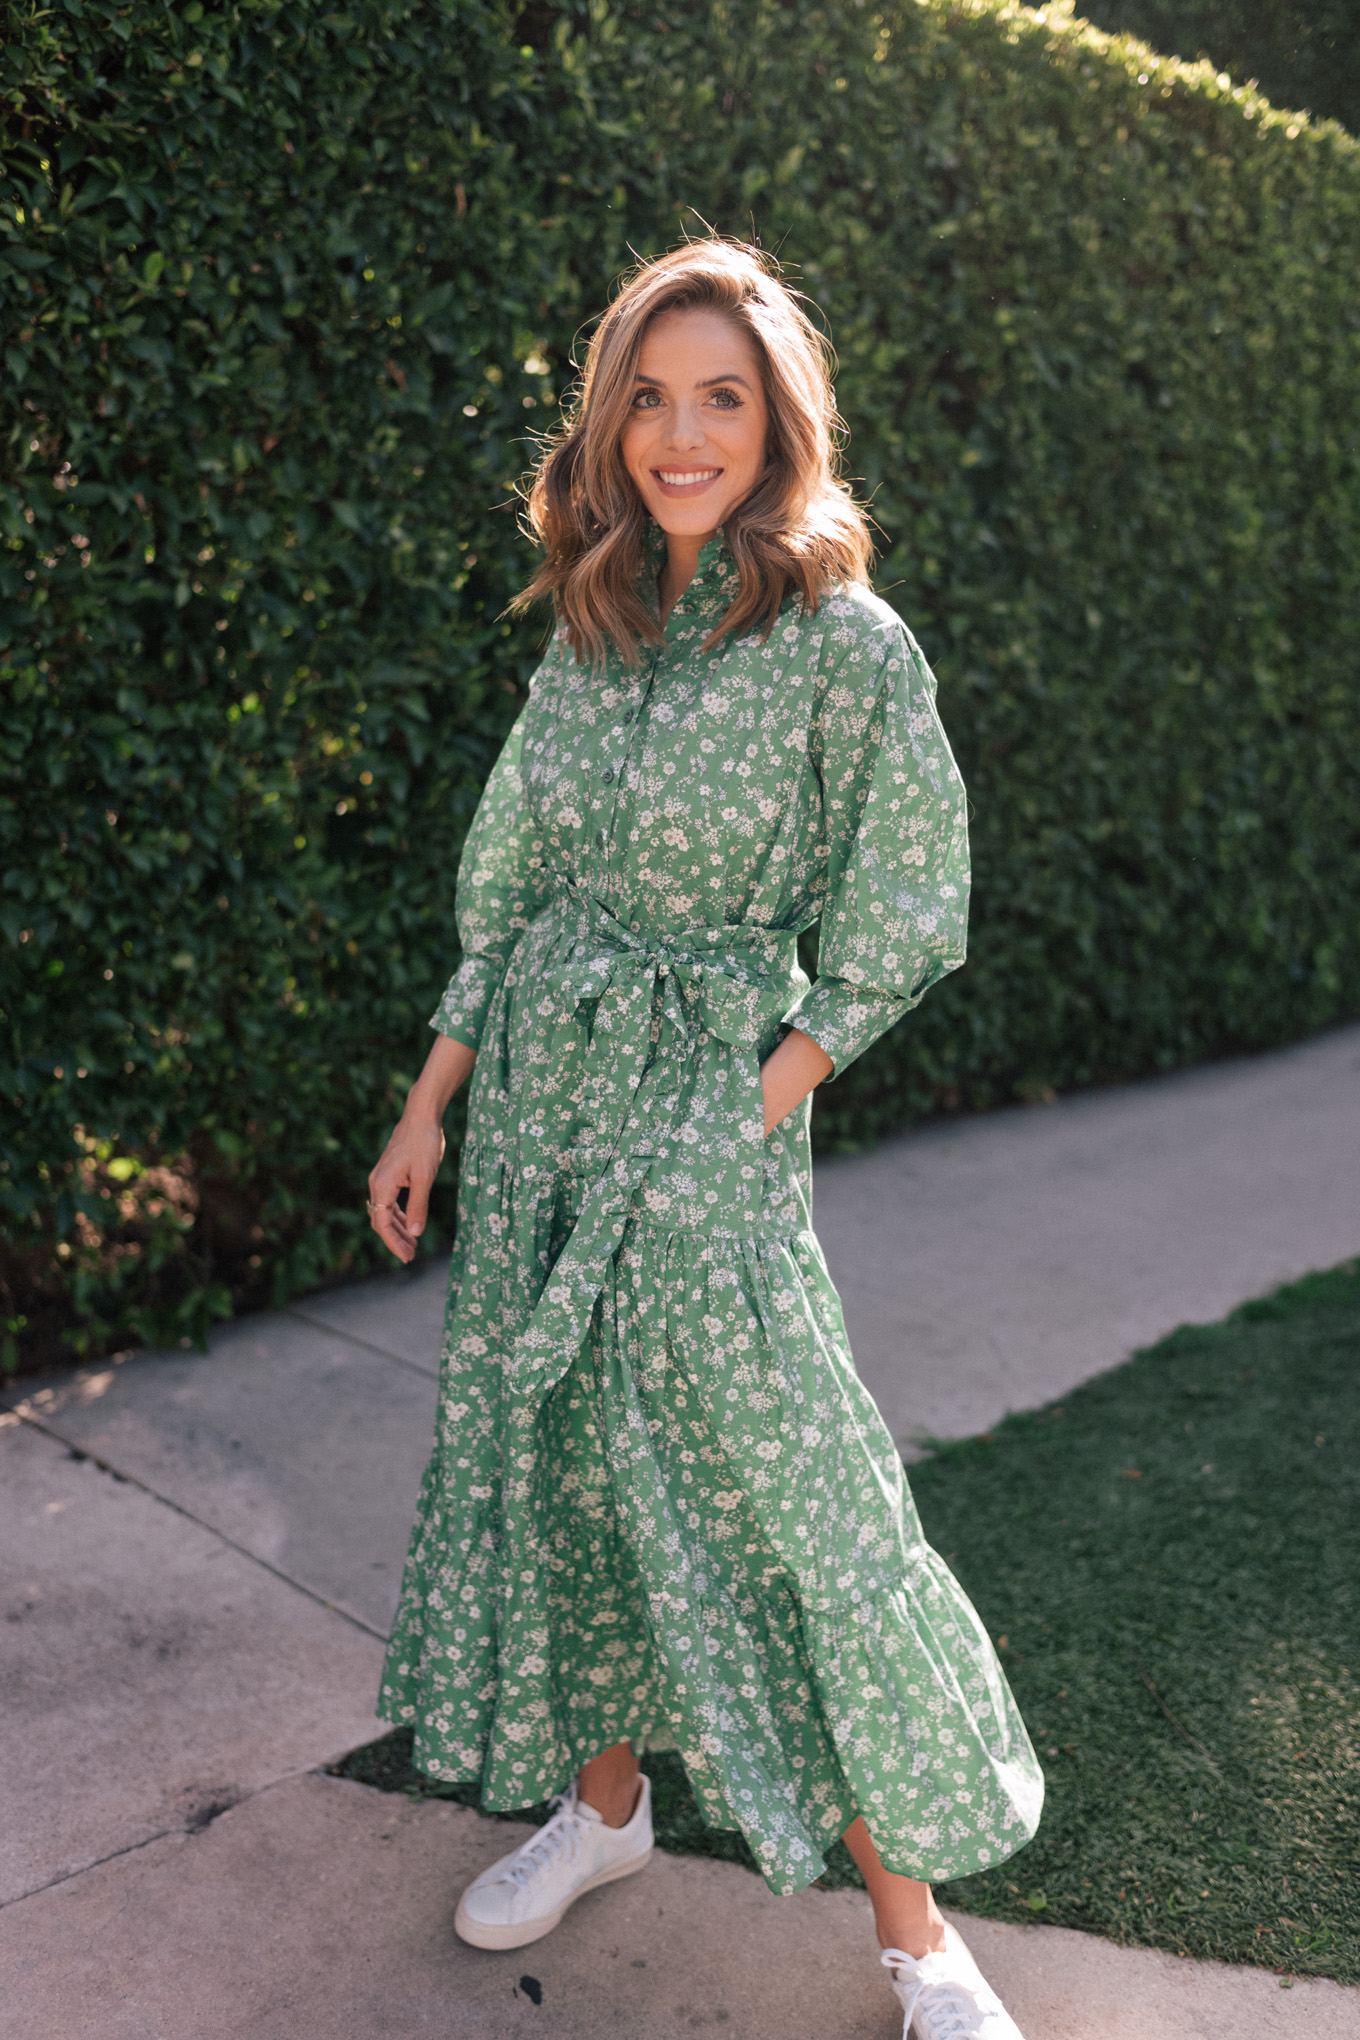 green and white floral dress